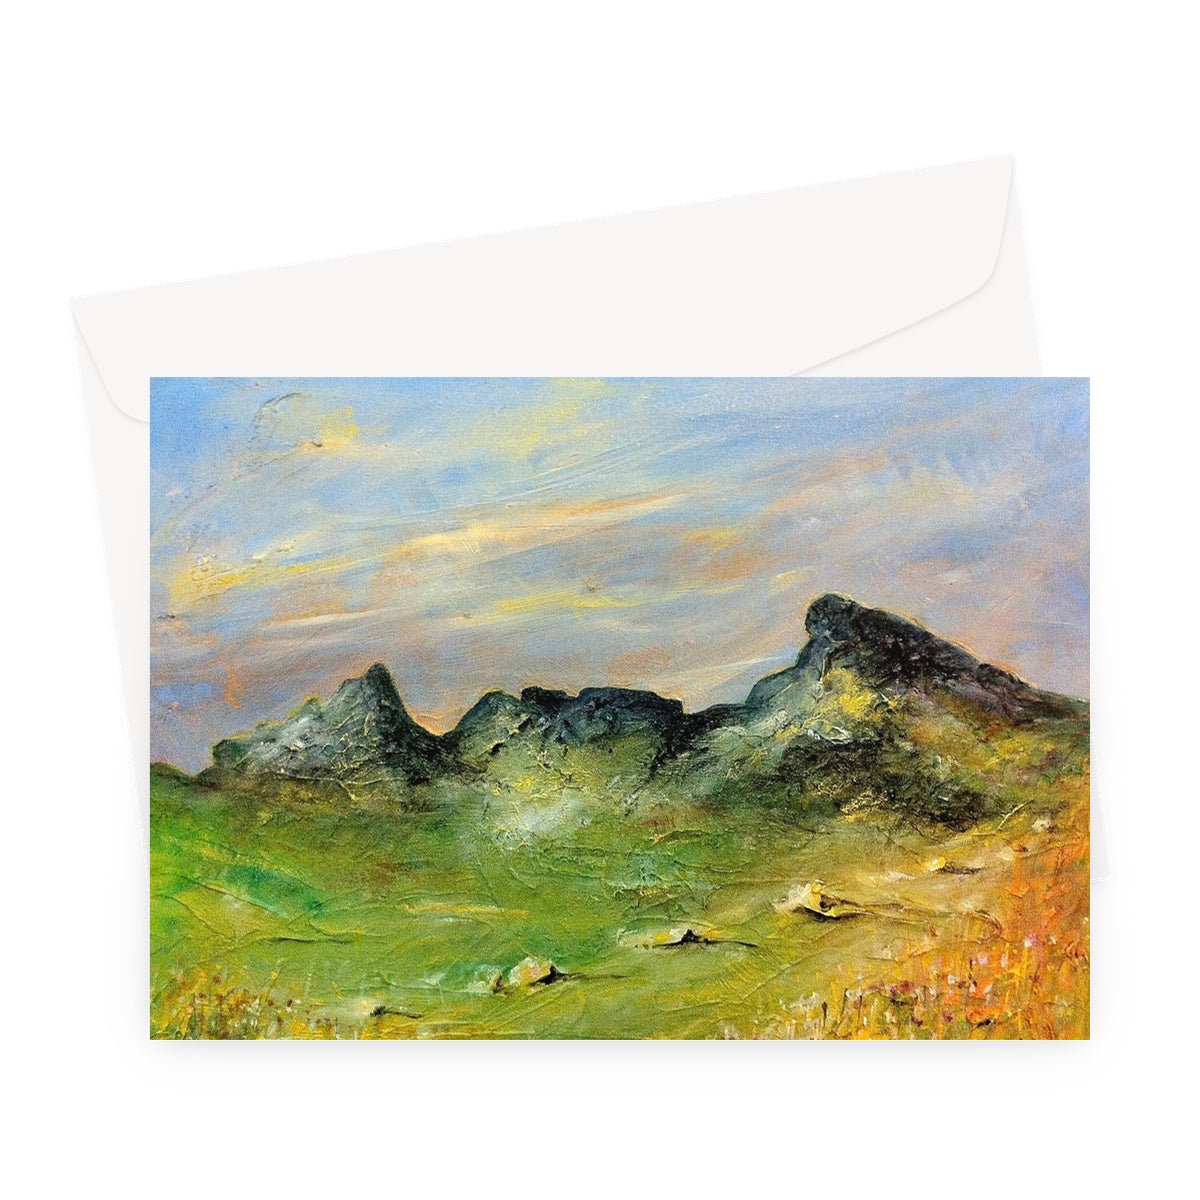 The Cobbler Art Gifts Greeting Card-Greetings Cards-Scottish Lochs & Mountains Art Gallery-A5 Landscape-1 Card-Paintings, Prints, Homeware, Art Gifts From Scotland By Scottish Artist Kevin Hunter